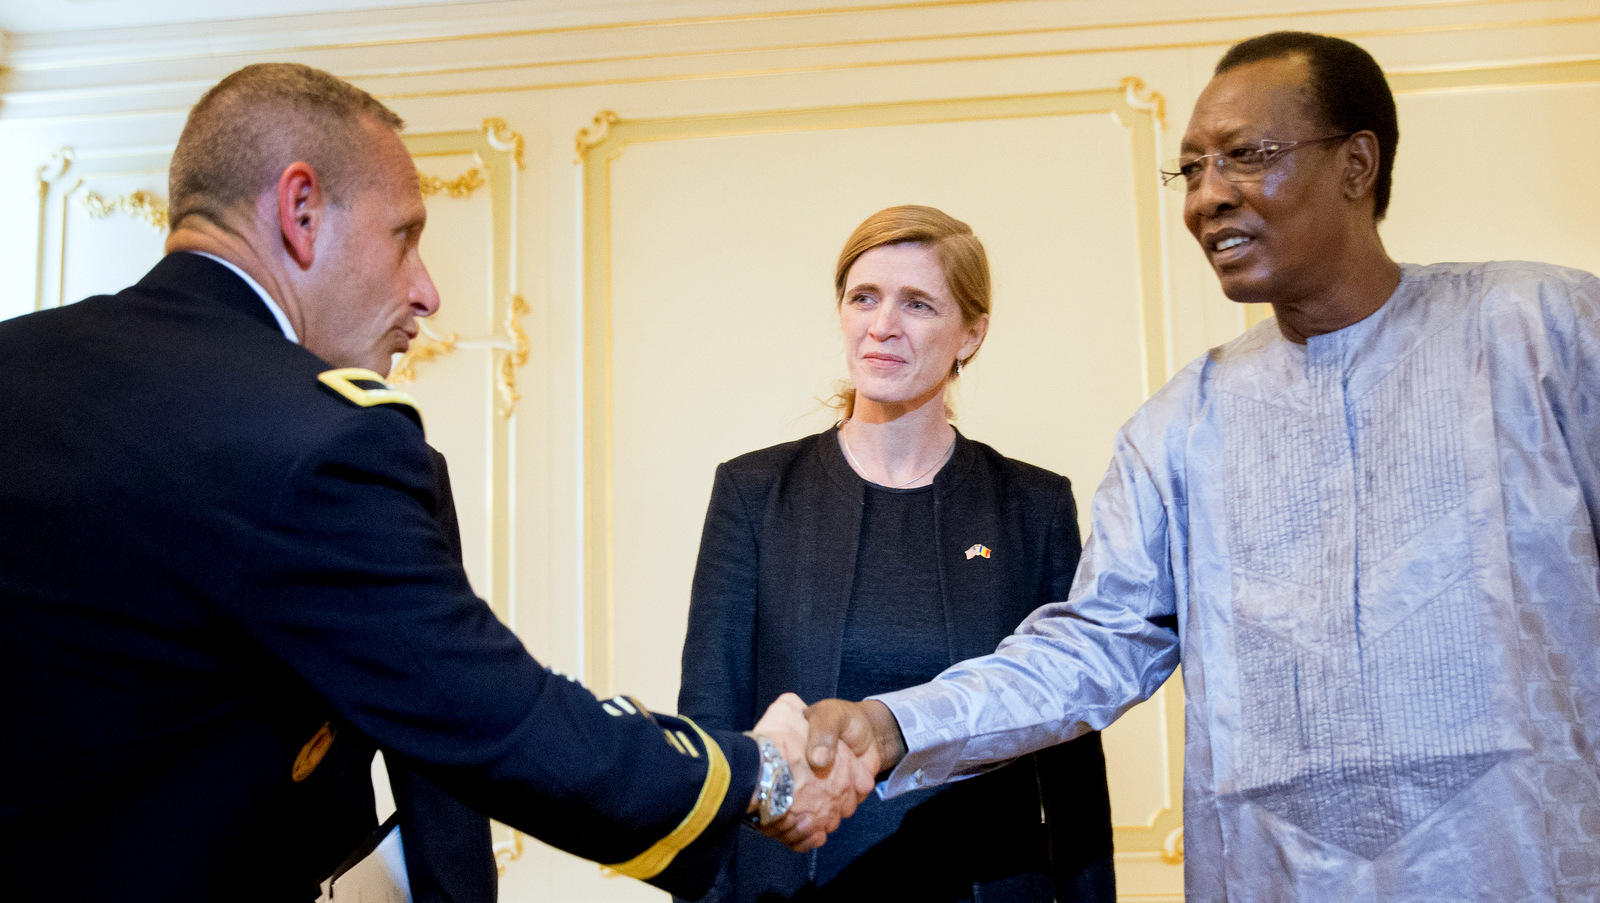 United States Special Operations Command Africa Commander Brig. Gen. Donald Bolduc, left, accompanied by U.S. Ambassador to the United Nations Samantha Power, center, meets with President Idriss Deby Itno, right, at the presidential palace in N’Djamena, Chad, Wednesday, April 20, 2016. Power was traveling to Cameroon, Chad, and Nigeria to highlight the growing threat Boko Haram poses to the Lake Chad Basin region. (AP/Andrew Harnik)